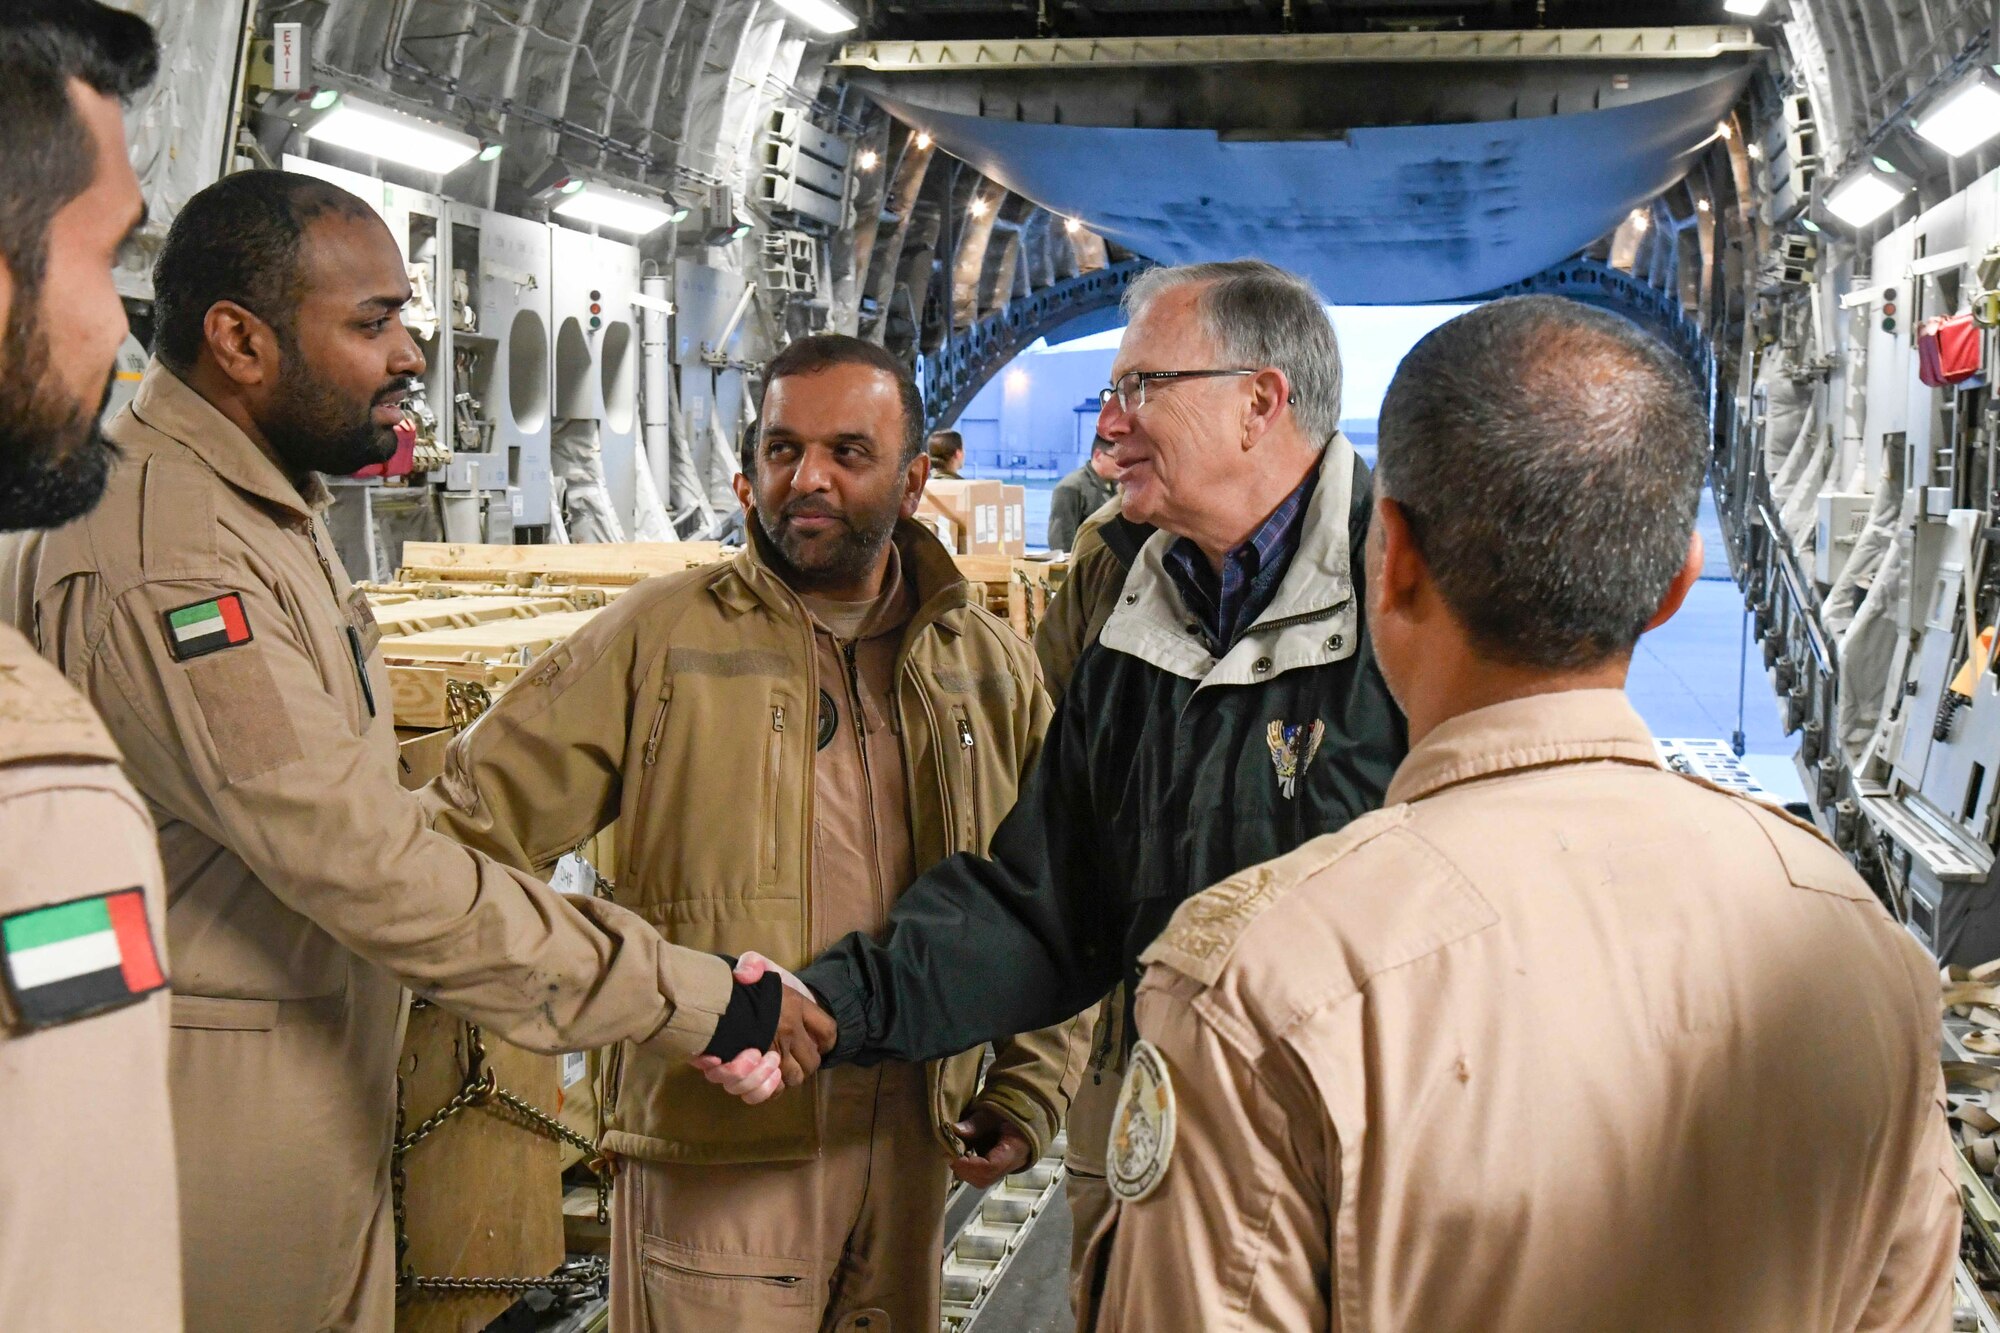 The Honorable Dr. Bruce D. Jette, assistant secretary of the Army (acquisition, logistics and technology), speaks with members of the United Arab Emirates air force 15th Strategic Airlift Squadron Jan. 26, 2020 at Dover Air Force Base, Del. Jette visited Dover to oversee a shipment of Patriot Advanced Capability 3 Missile Segment Enhanced missiles to the United Arab Emirates. (U.S. Air Force photo by Senior Airman Eric M. Fisher)